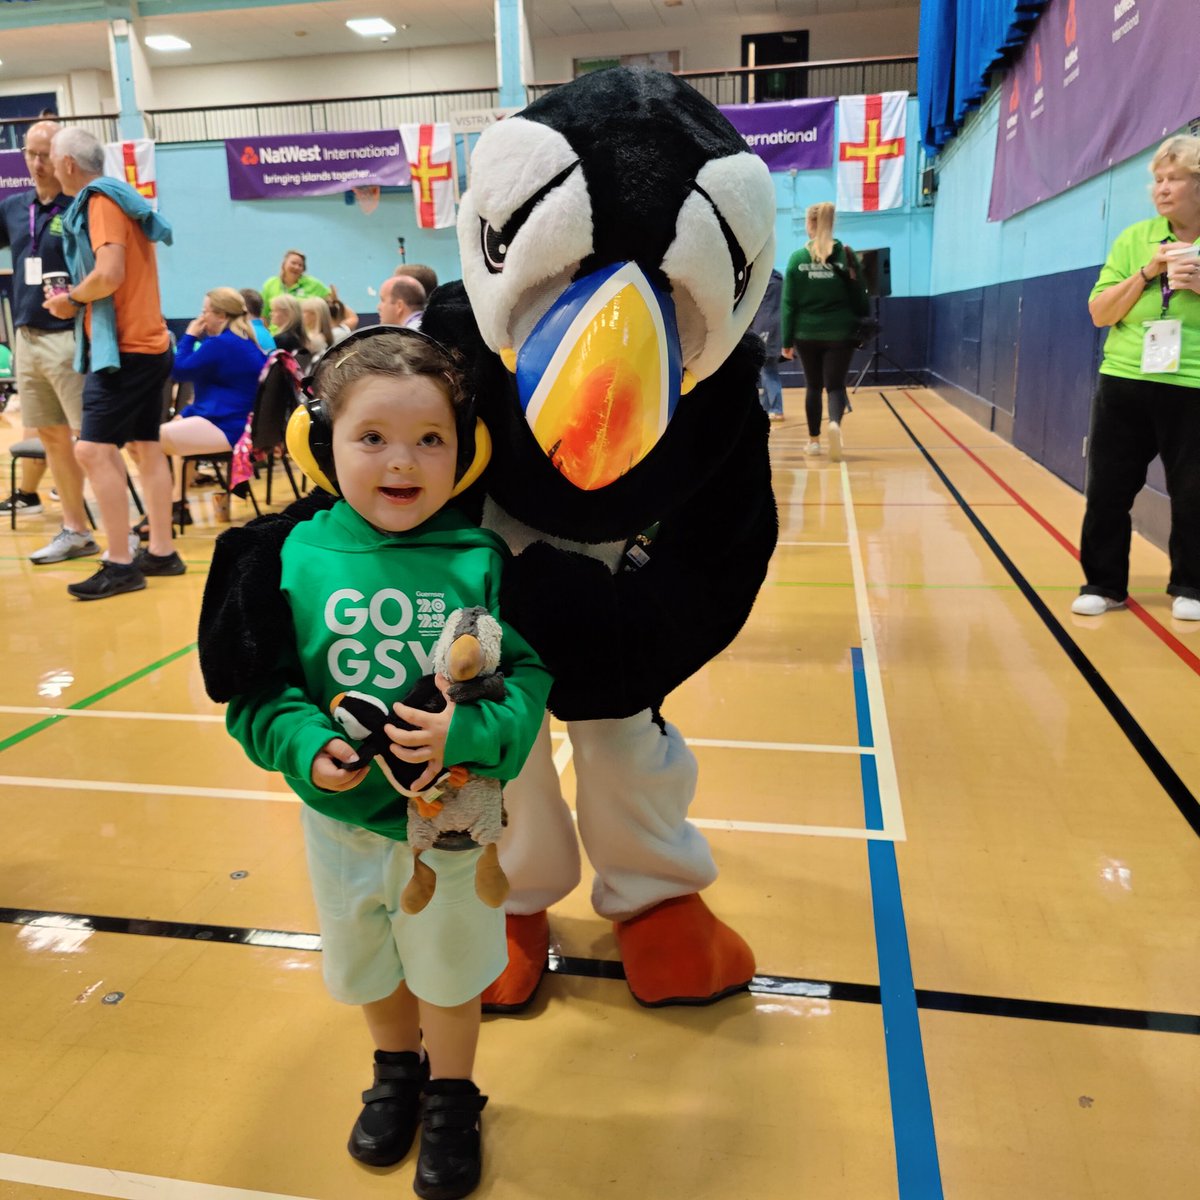 Nia and her favourite cuddly puffin 'King Oppie' finally caught up with Jet this morning at the women's basketball. Jet was amazing with her, doing high fives and dancing. It absolutely made her day! @Guernsey_2023 #ThankYouJet